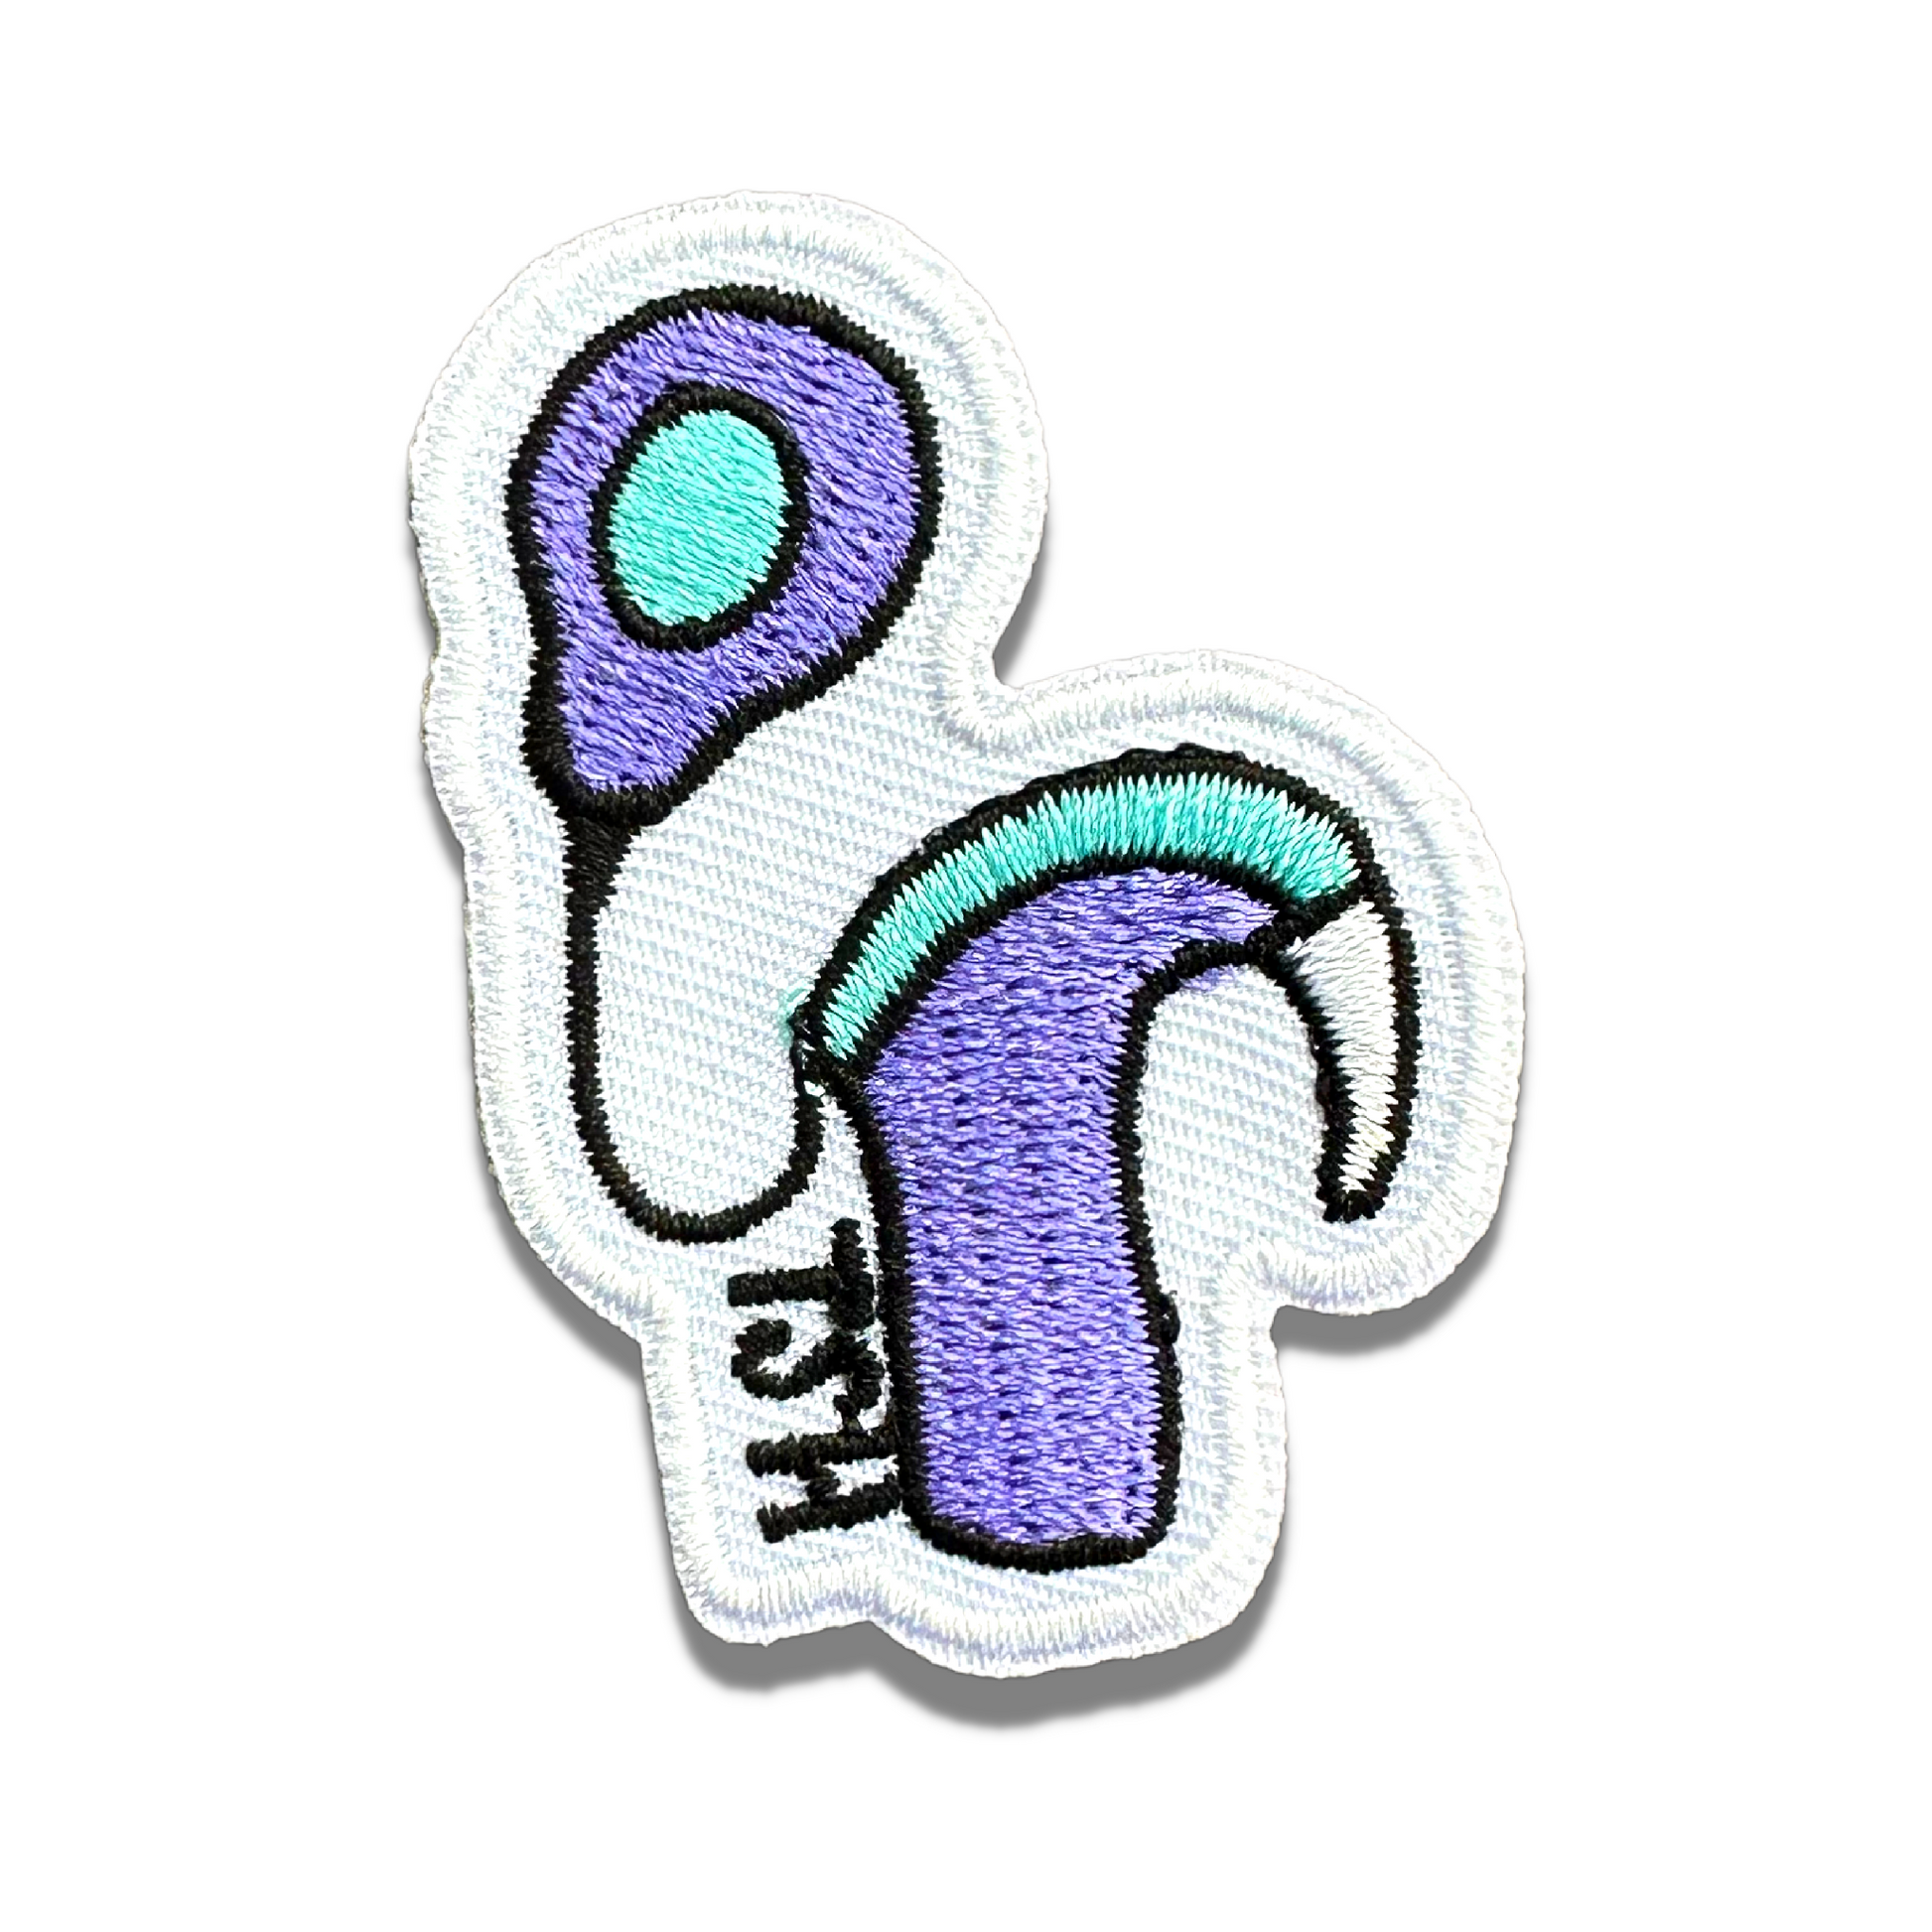 Cochlear Implant Patch - TinySuperheroes